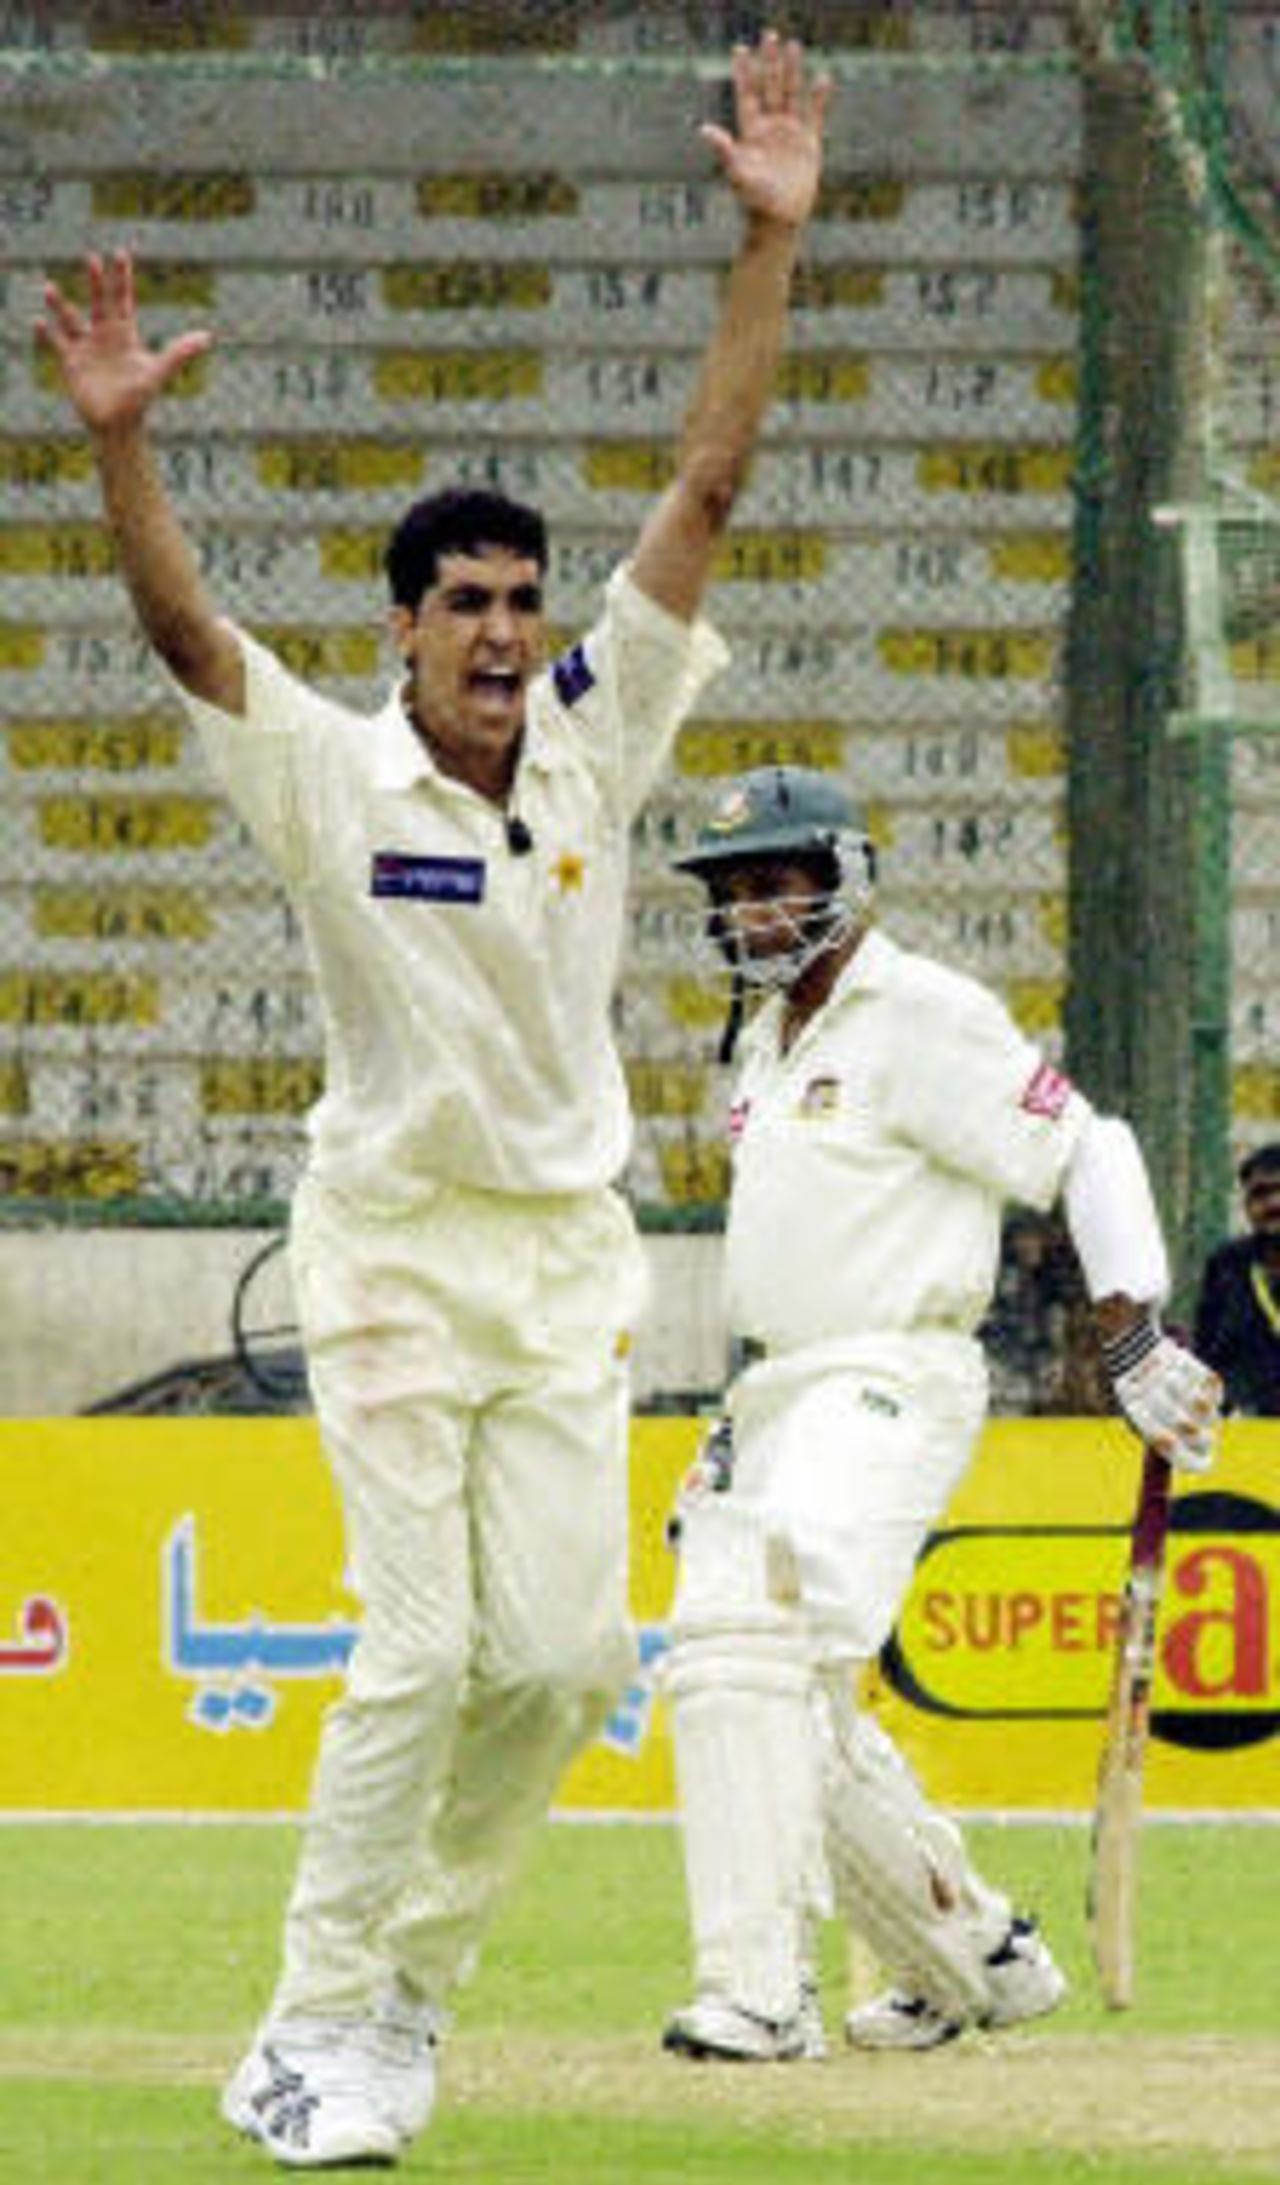 Habibul Bashar (R) looks on as Umar Gul (L) unsuccessfuly appeals for an LBW decission during the first day of the first Test match at Karachi National Stadium, 20 August 2003.